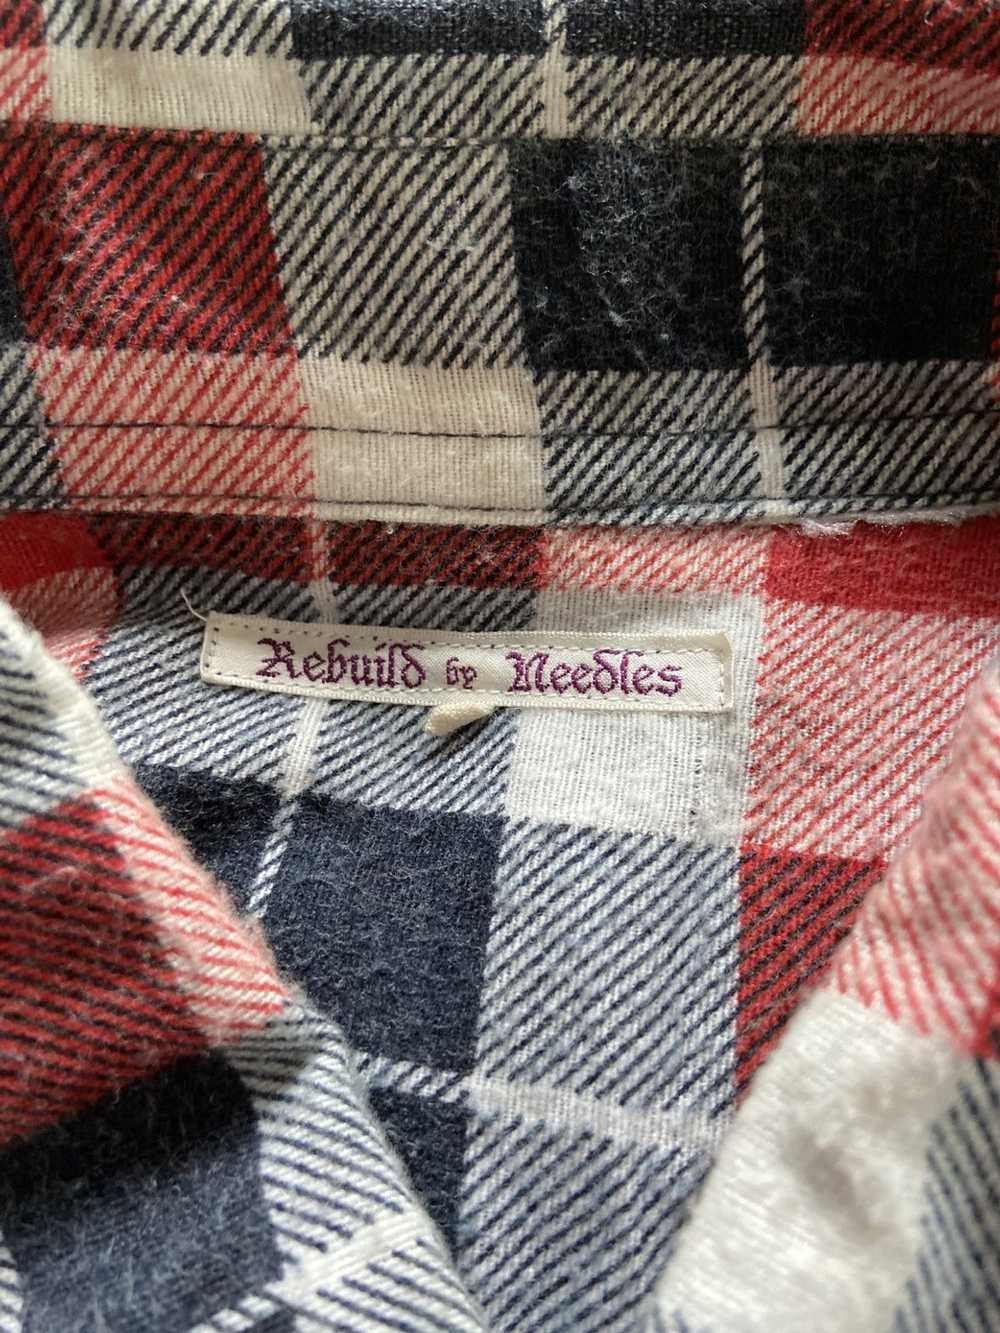 Needles Rebuild by Needles 7-Cut Flannel - image 3